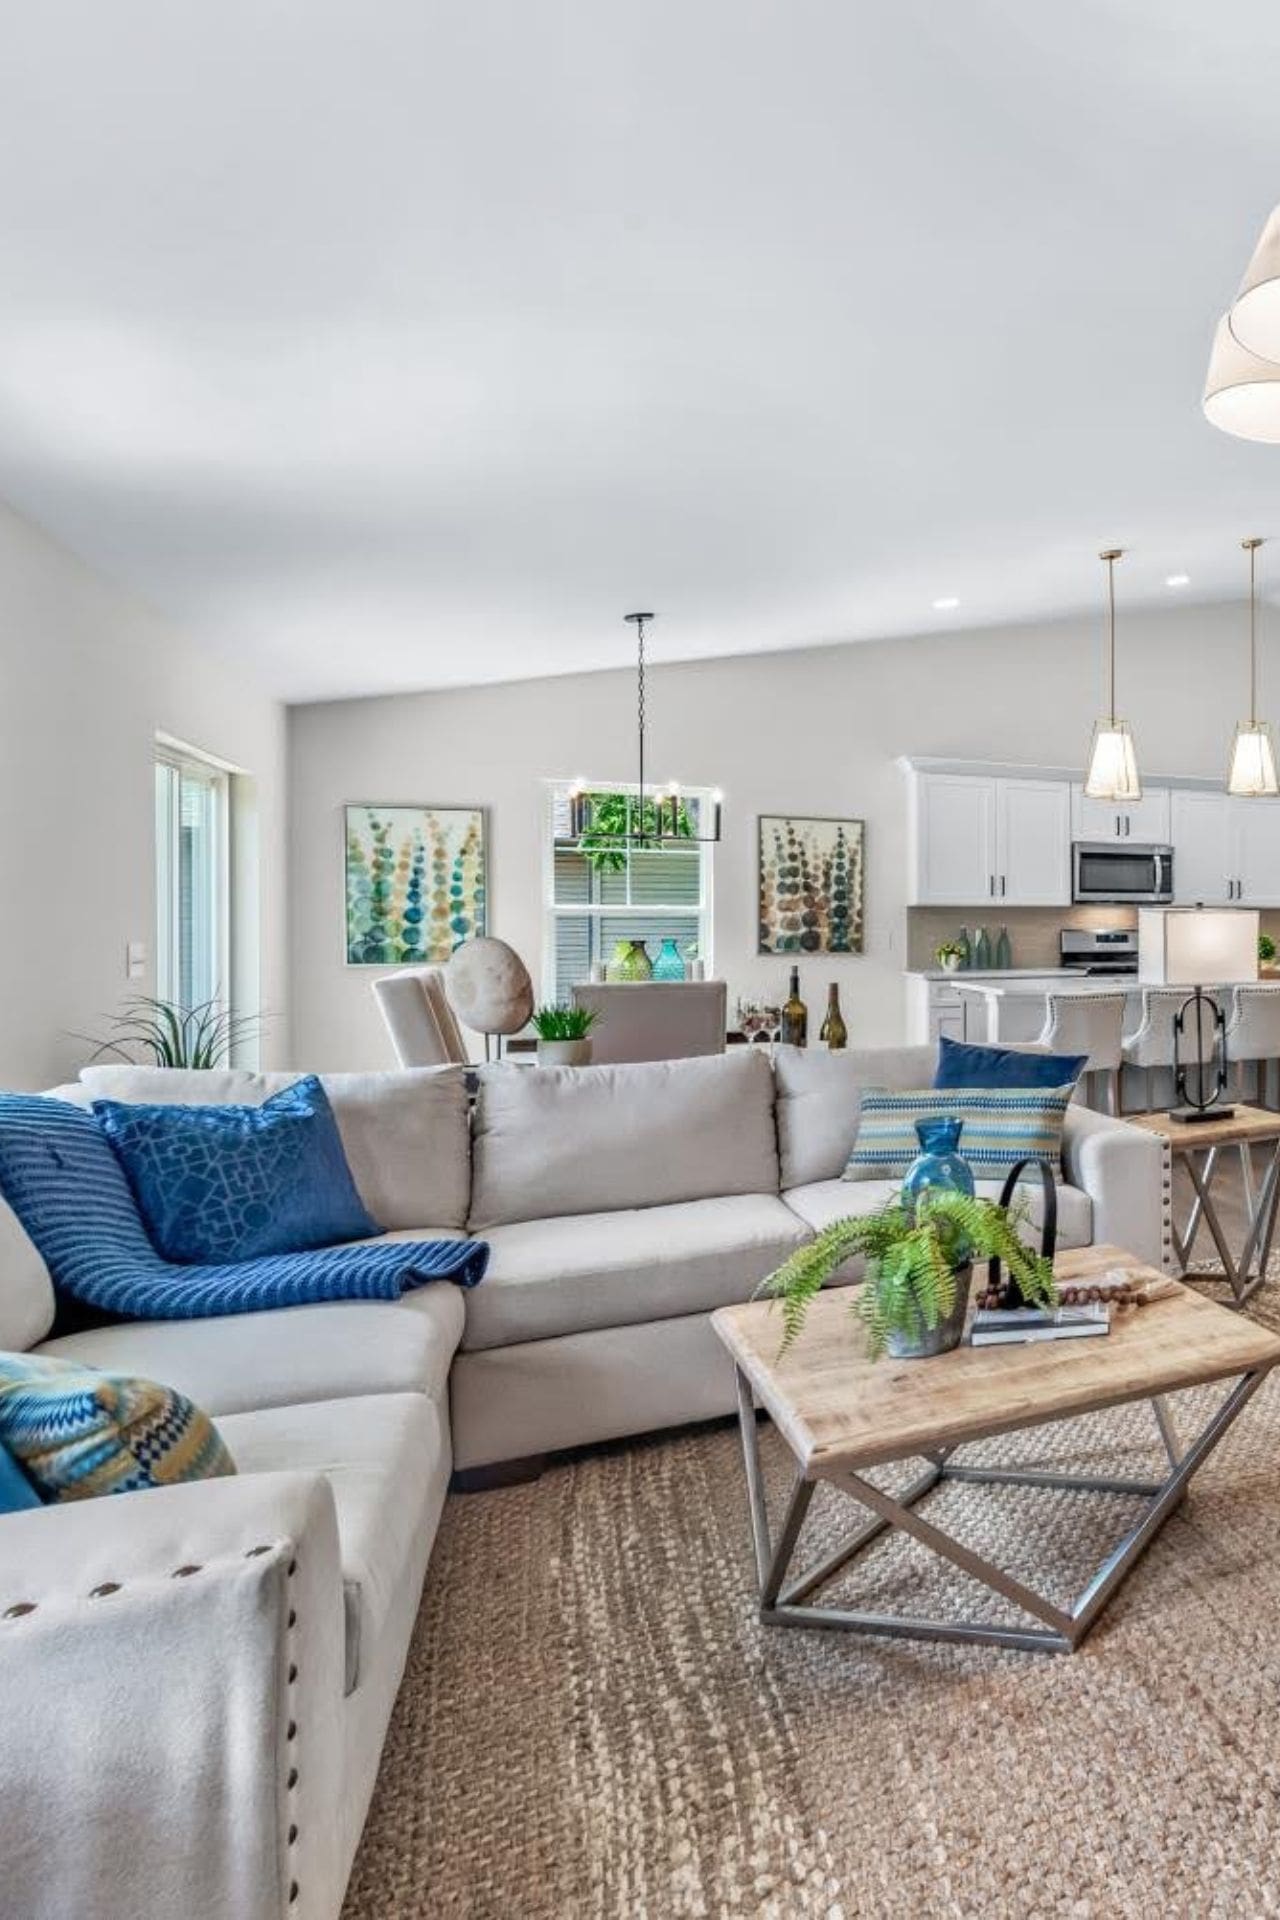 A well-organized staged living space with a cozy couch, a stylish coffee table, and a fully-equipped kitchen.